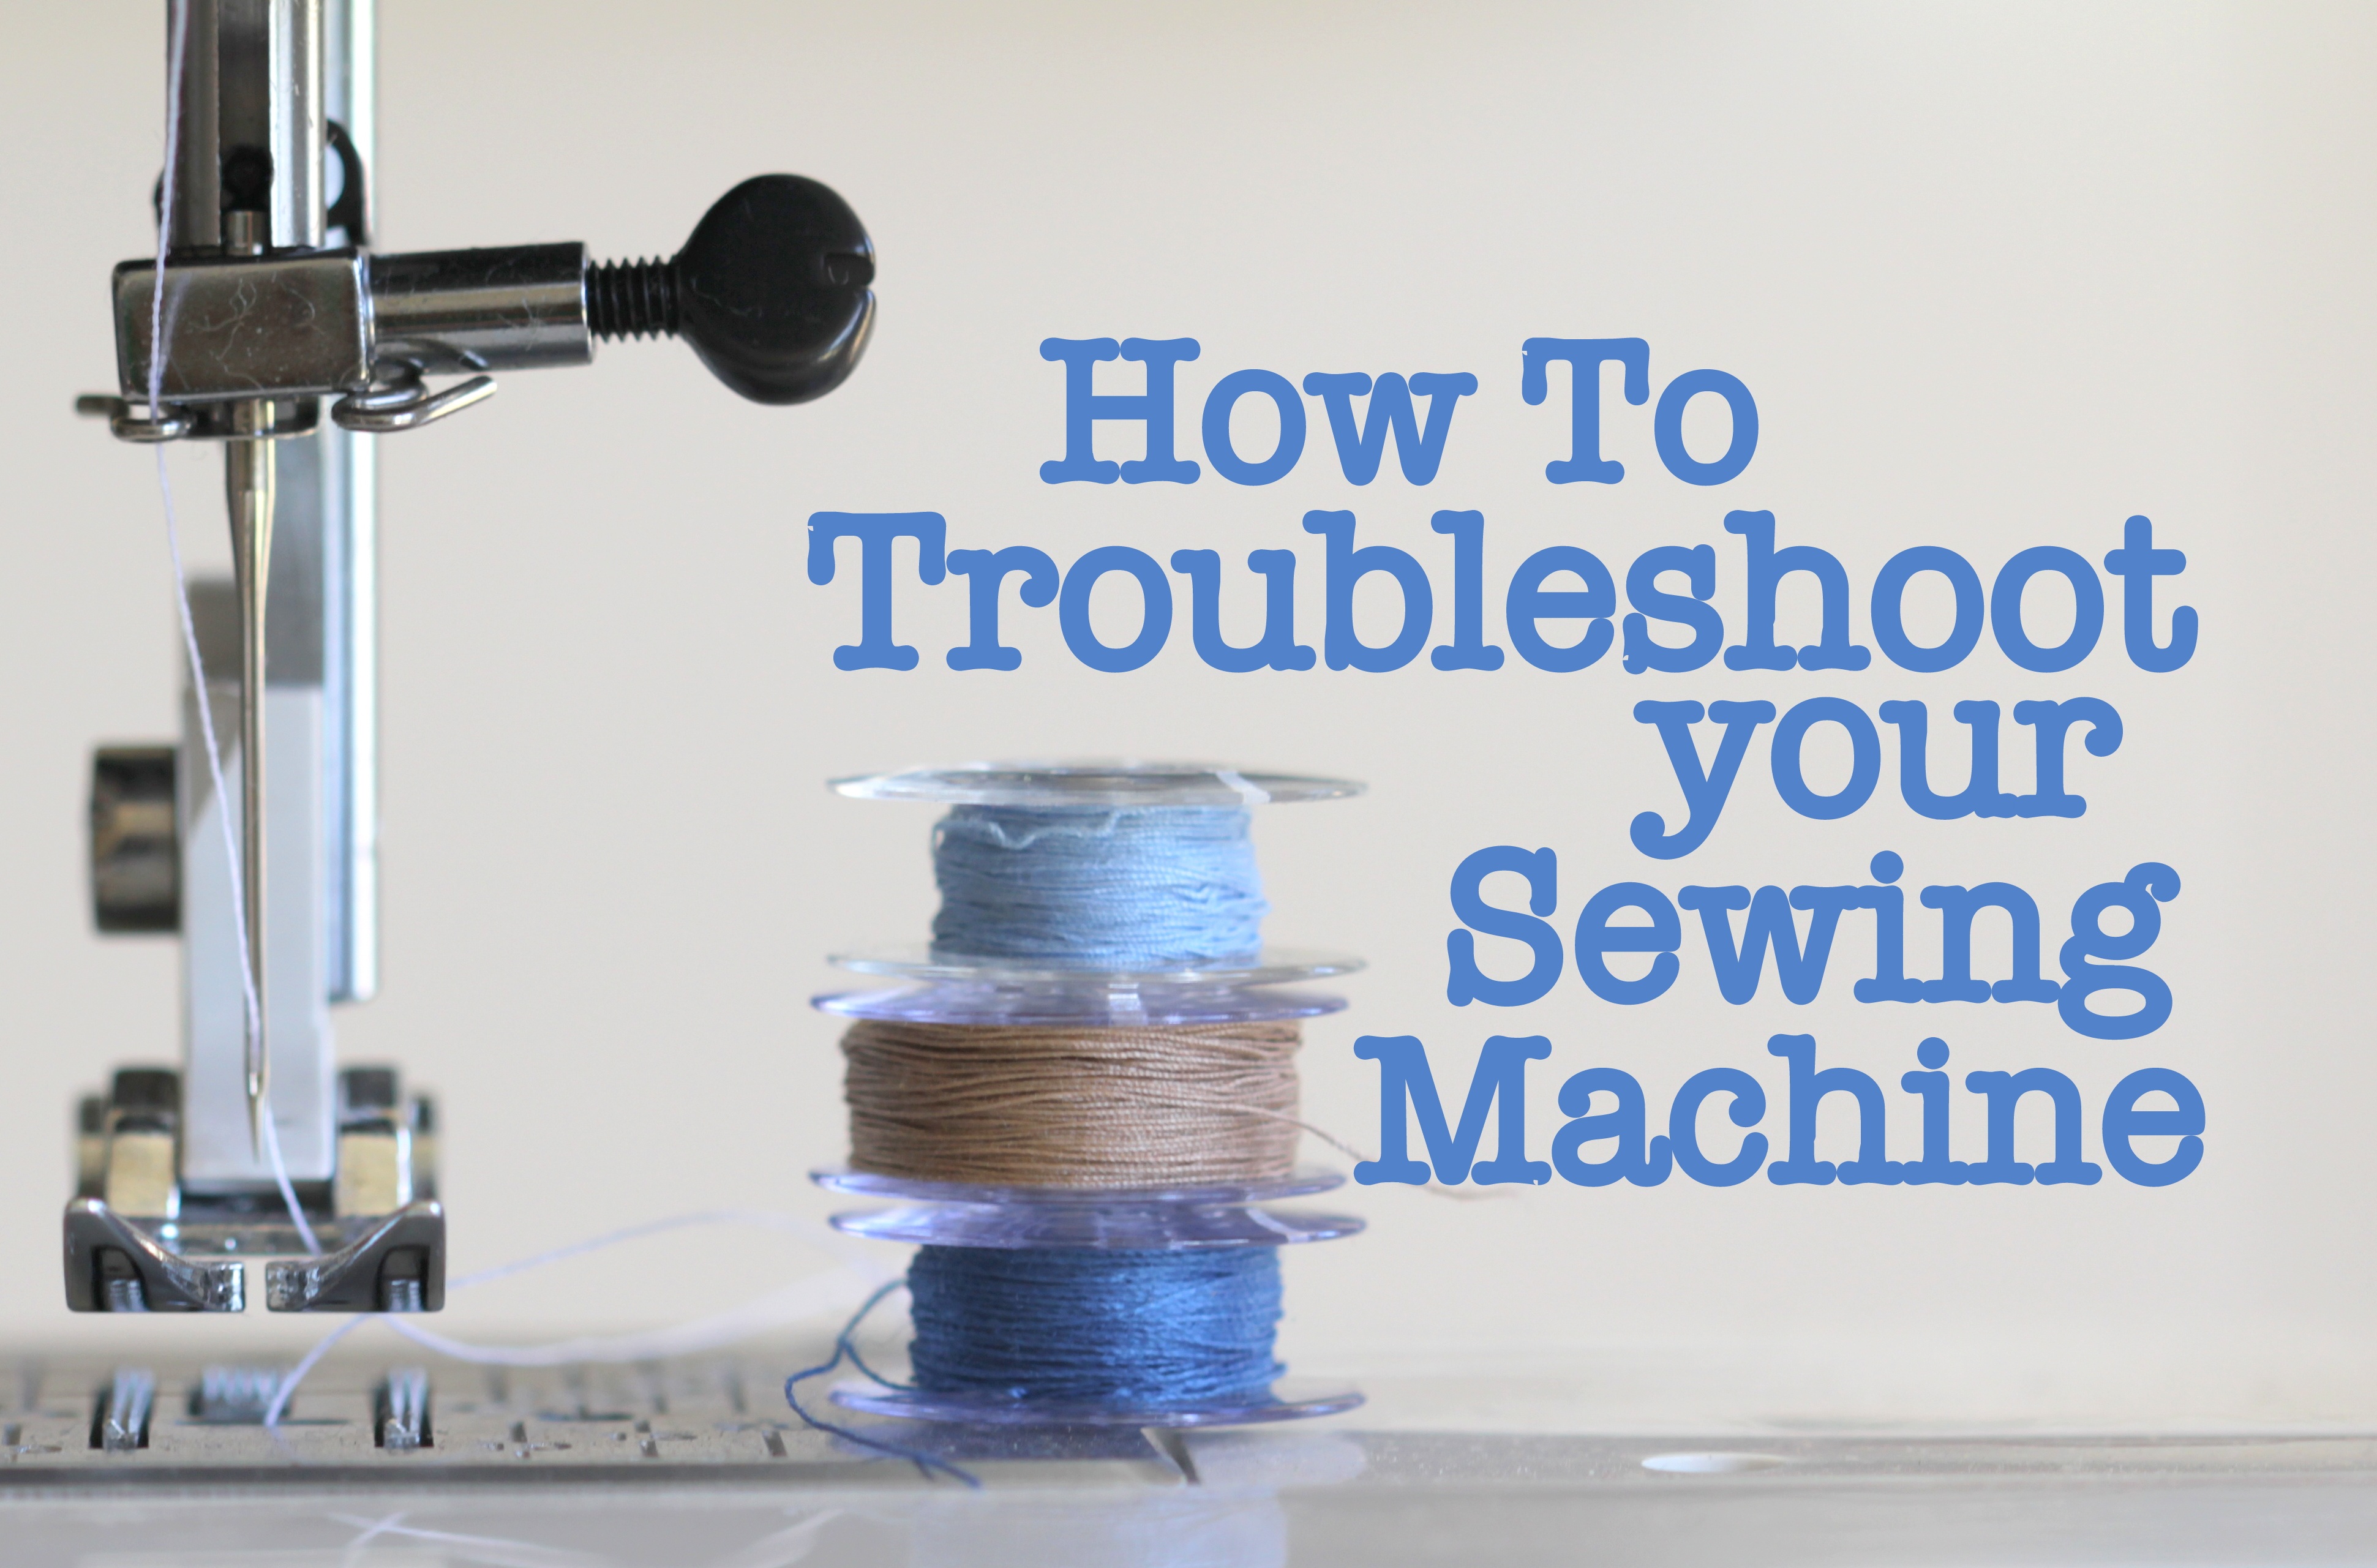 How to Troubleshoot Your Sewing Machine